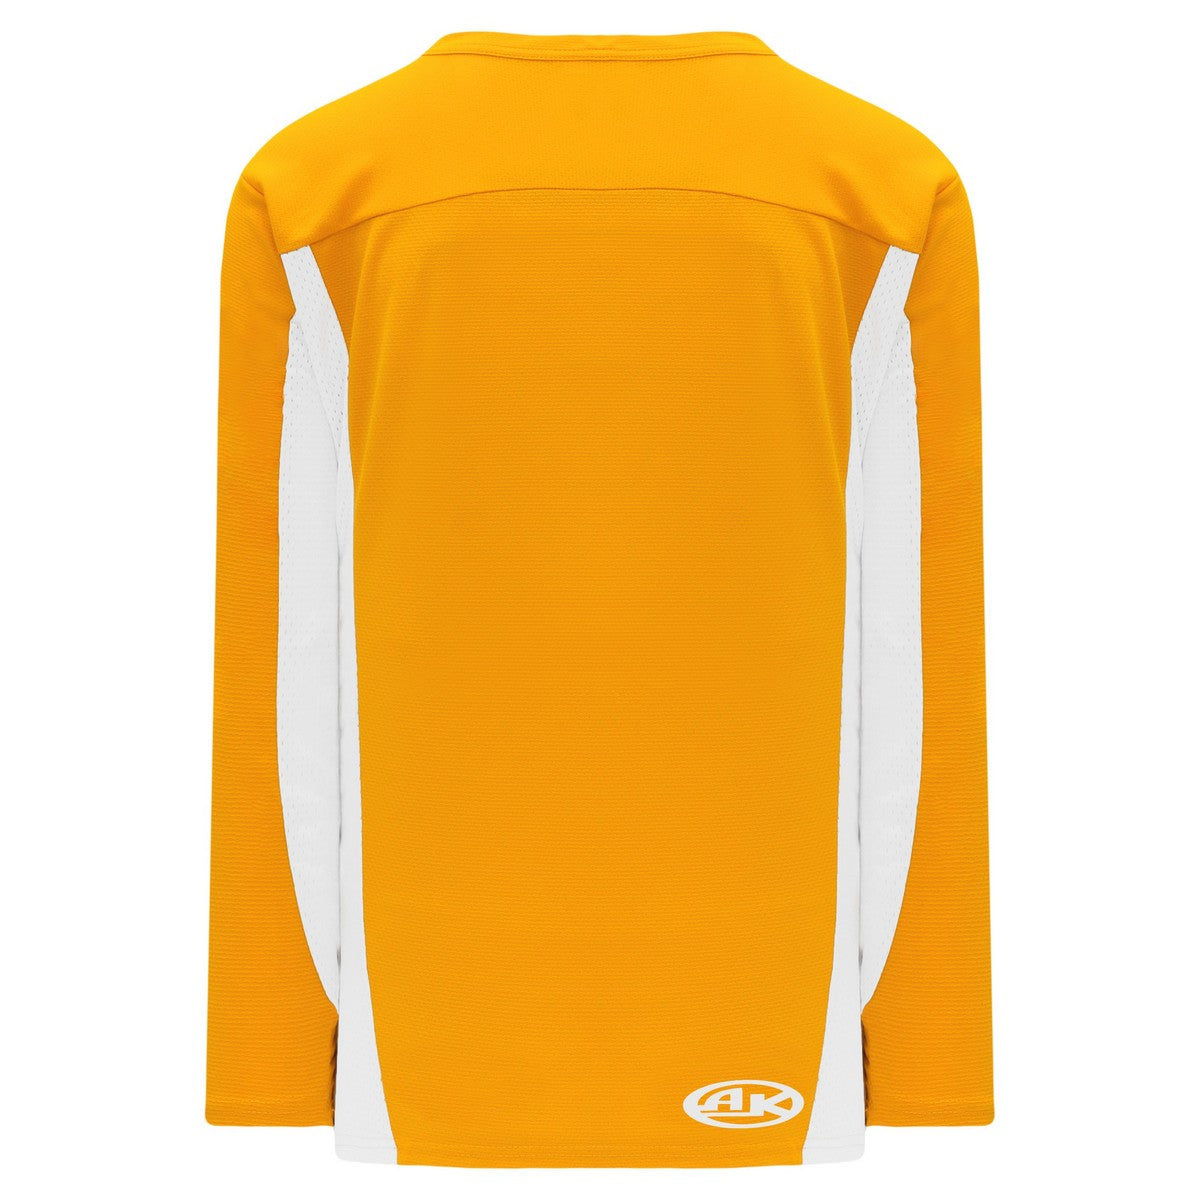 League Series H7100 Jersey in Gold-White